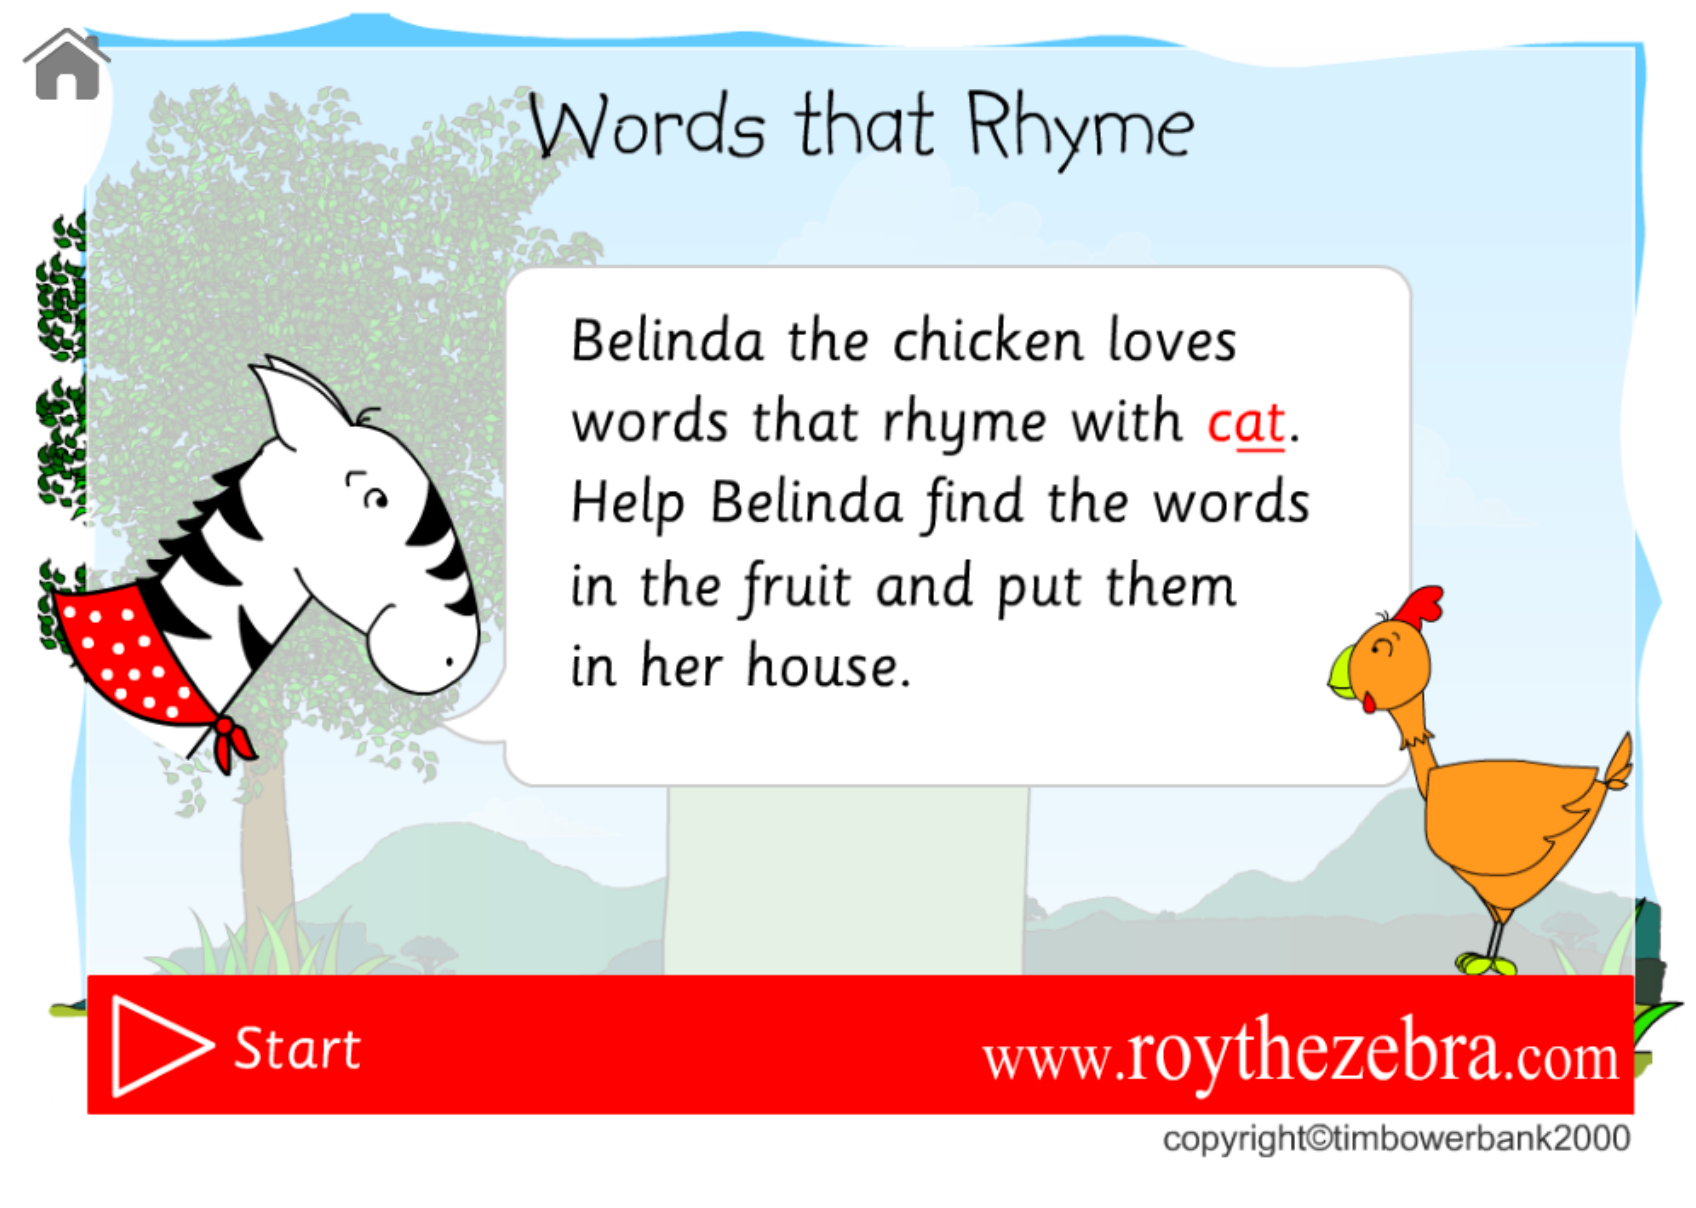 Words that rhyme games1696 x 1208